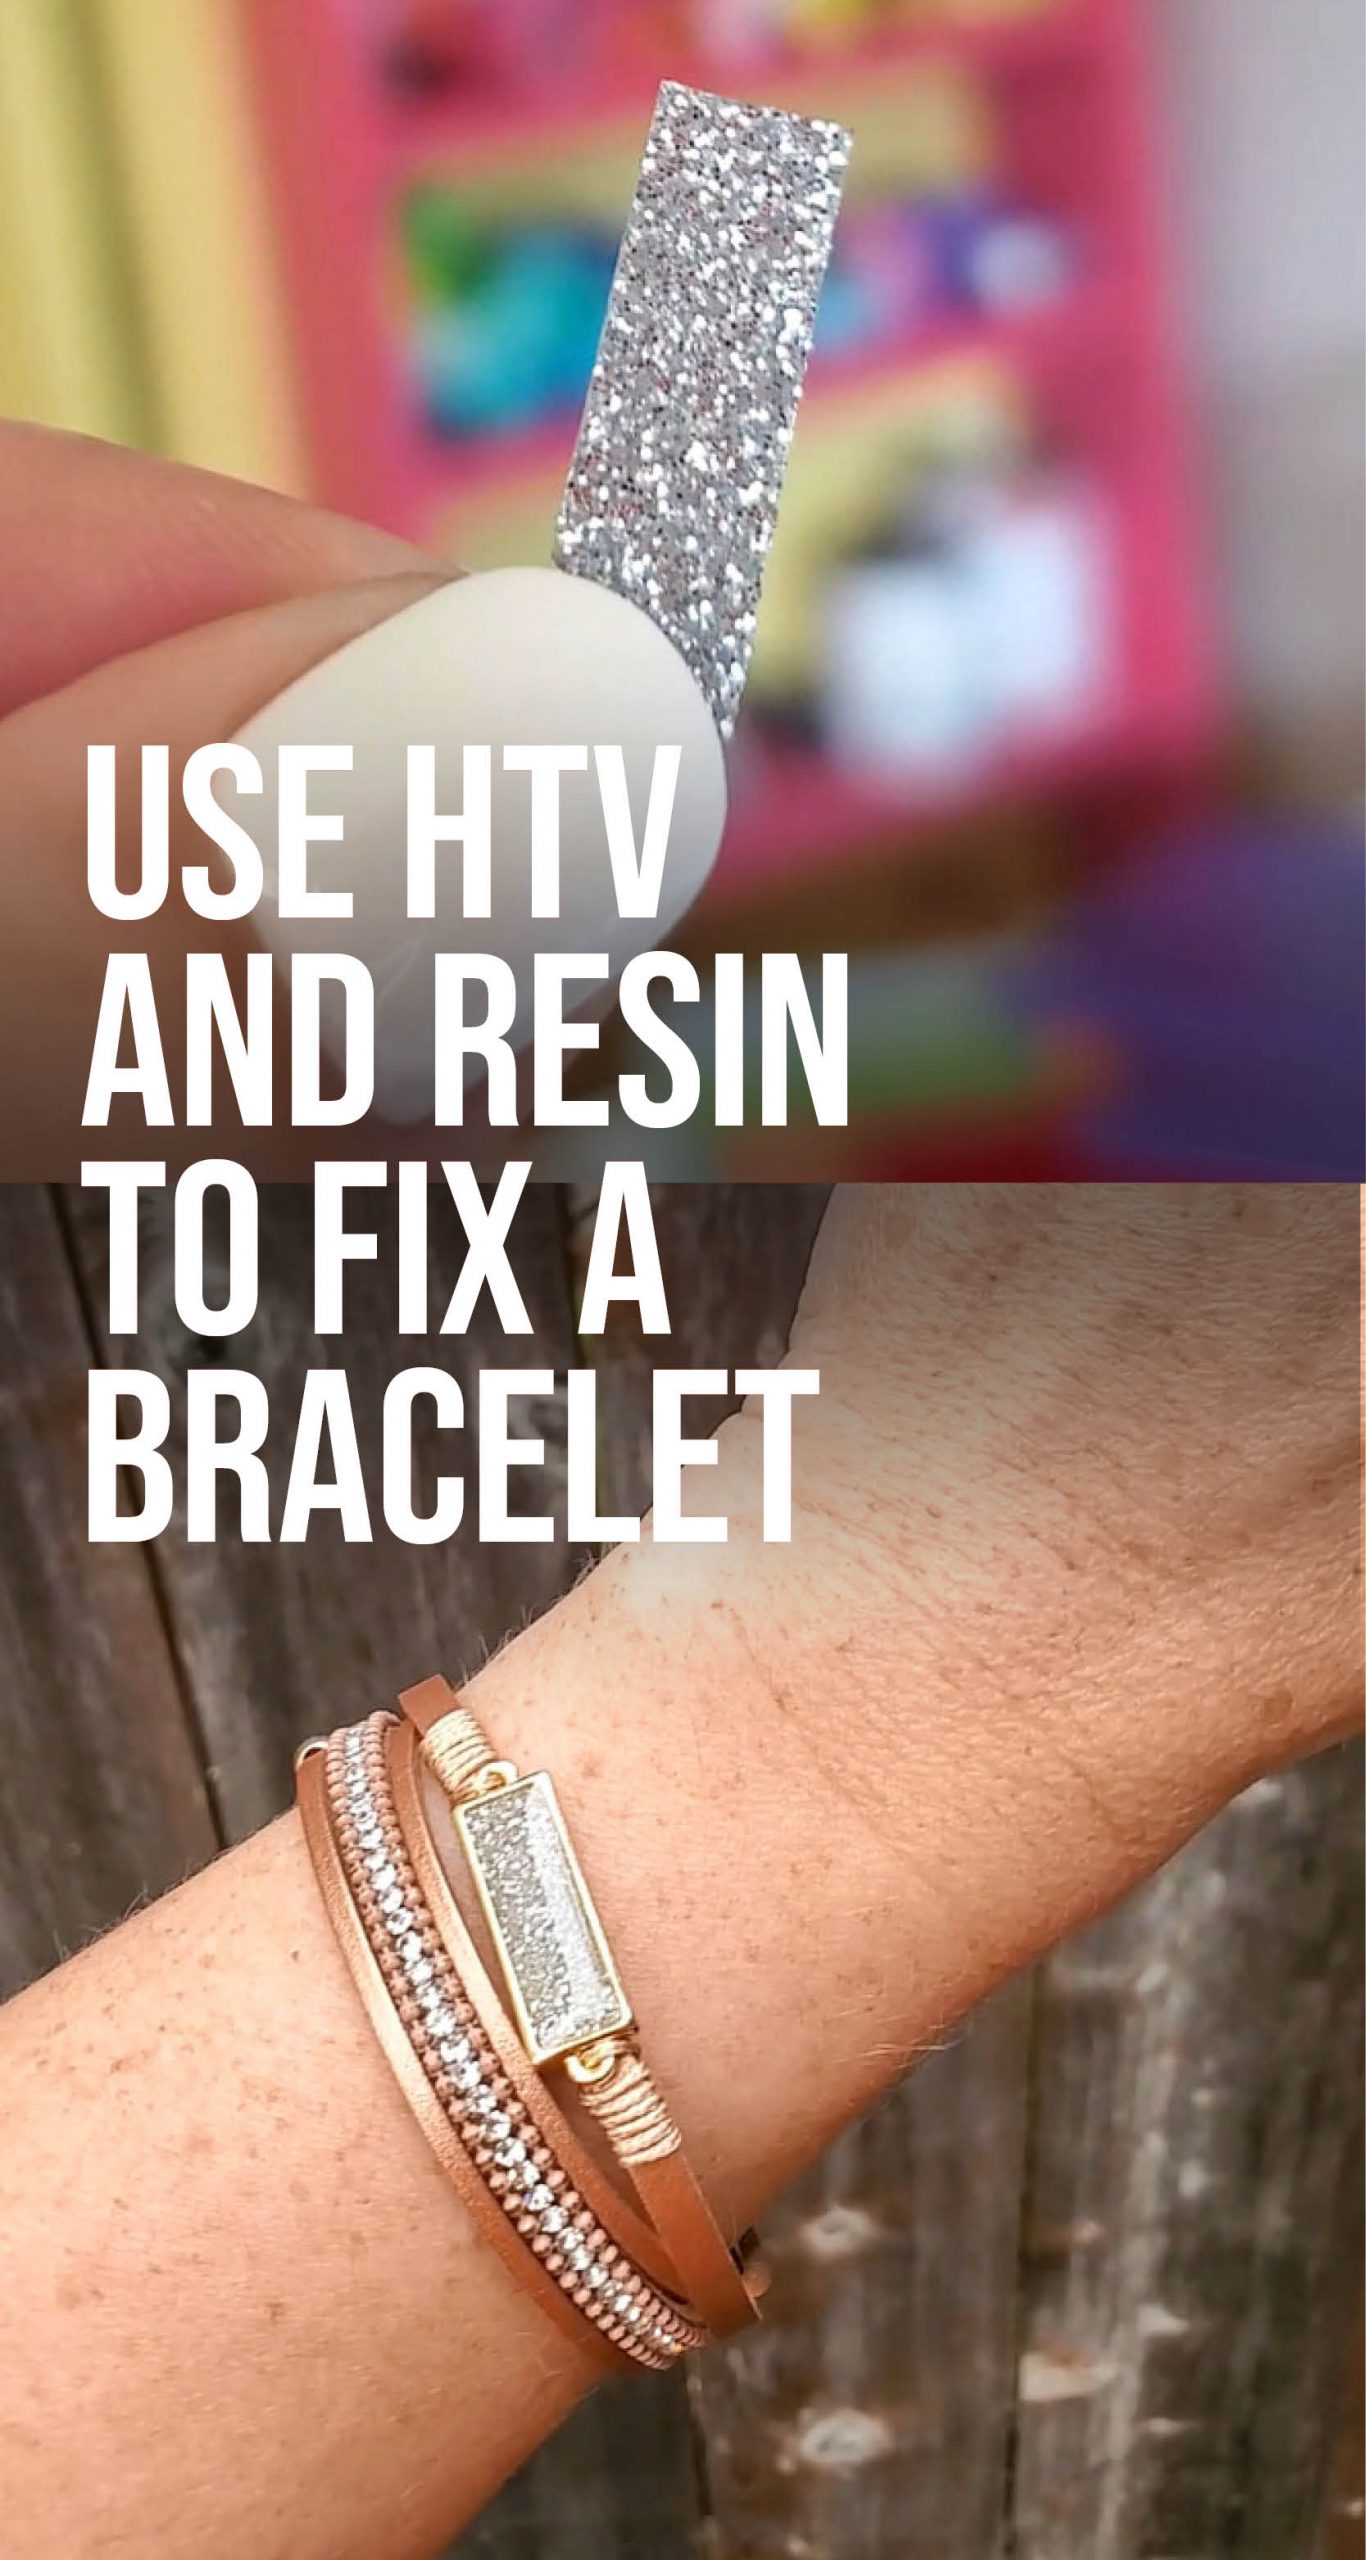 Have a piece of jewelry that's not exciting as it could be? Here's a way to upgrade it with resin. via @resincraftsblog